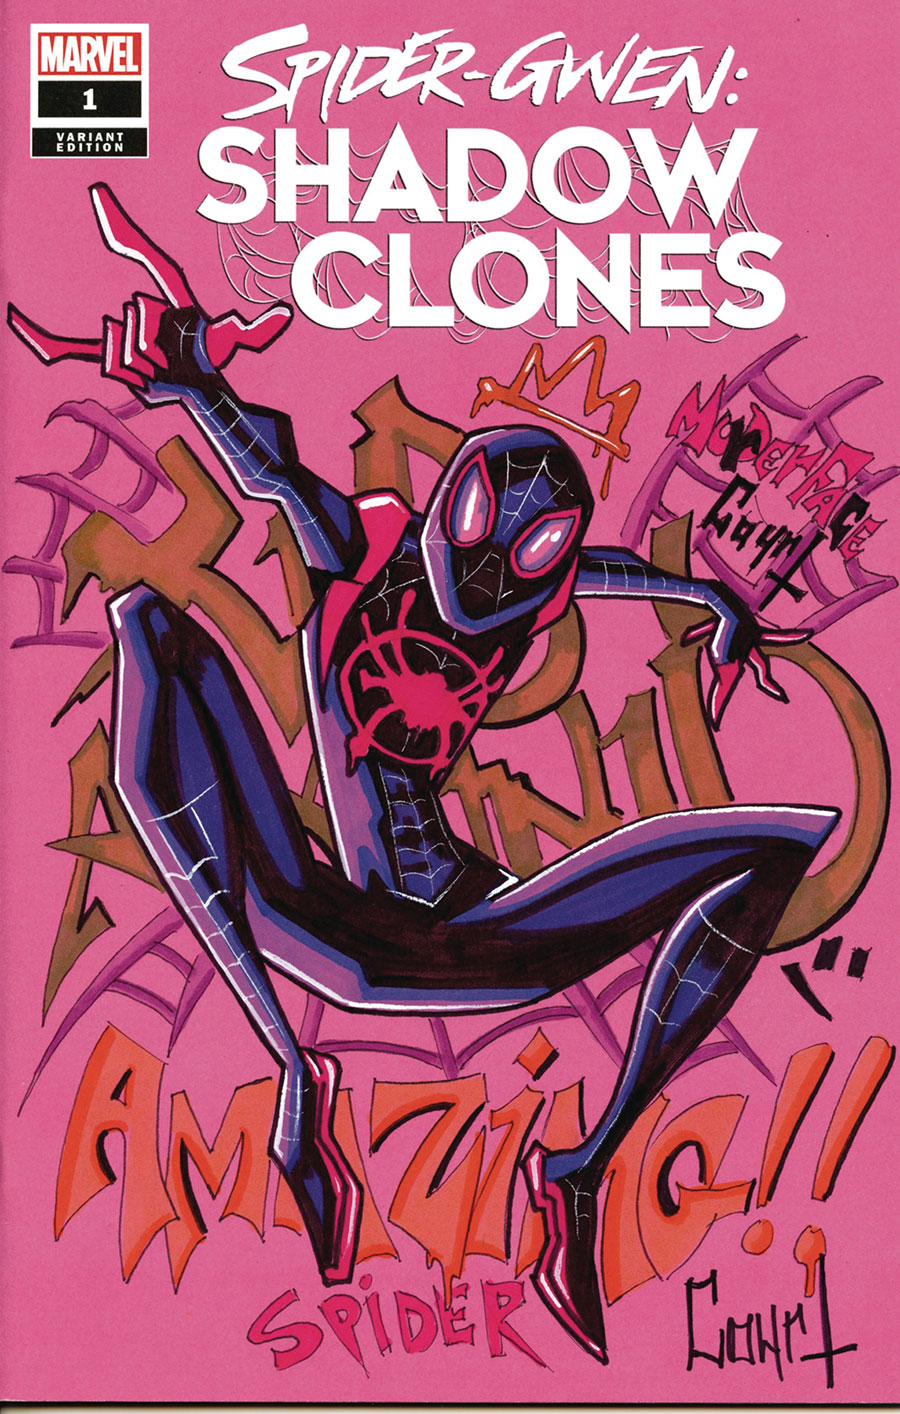 Spider-Gwen Shadow Clones #1 Cover R DF Pink Blank Variant Cover With A Miles Morales Hand-Drawn Sketch By Jessica Court